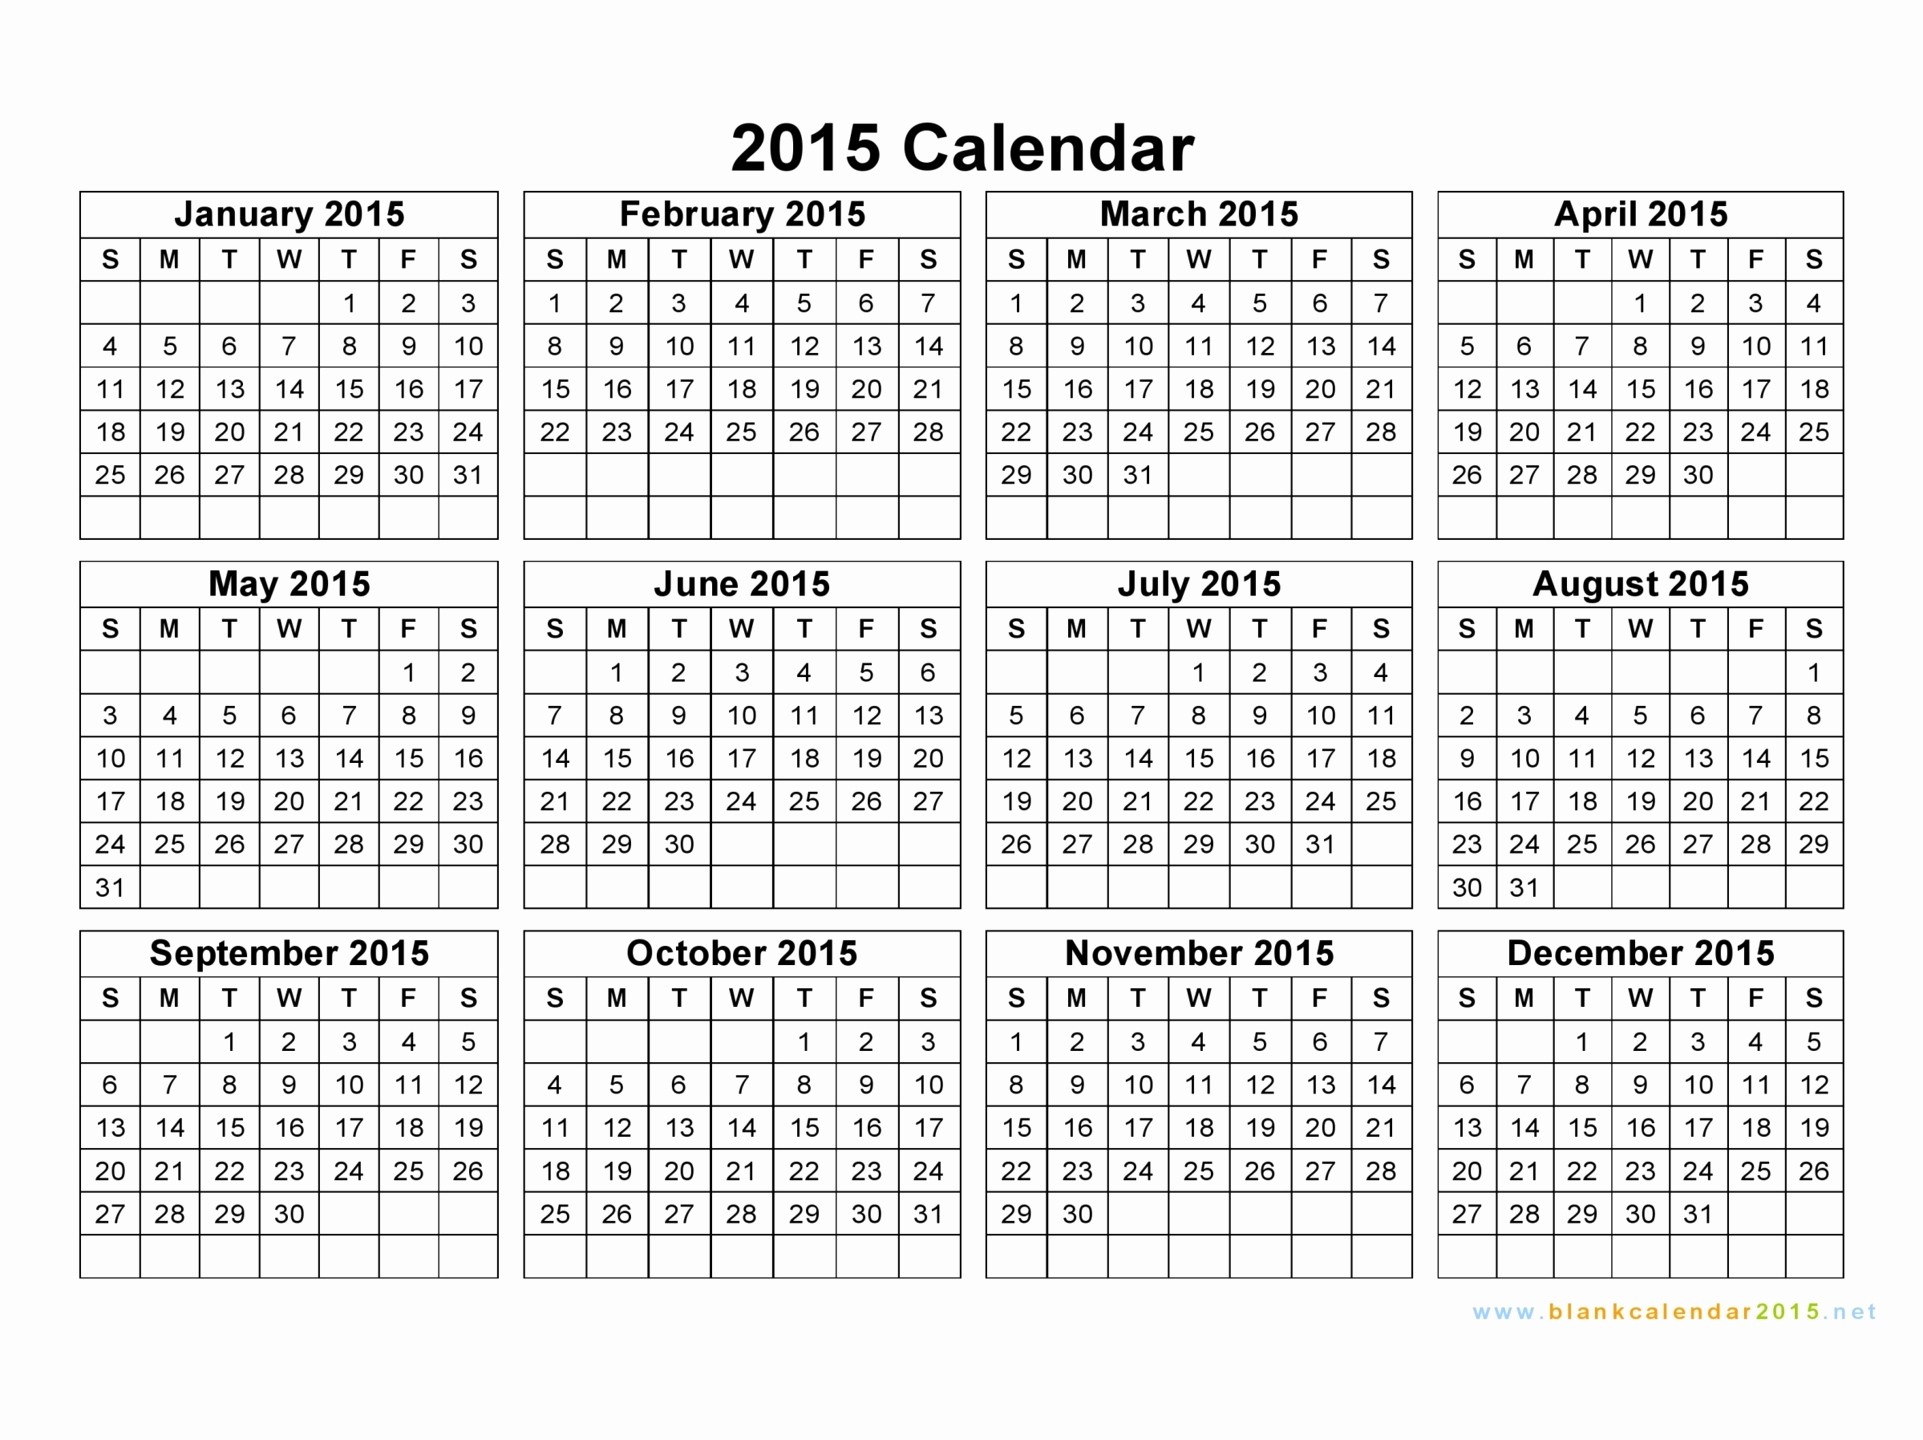 Free Yearly Calendar Templates 2015 Unique Free Printable Yearly Calendar 2015 – 2017 Printable Calendar